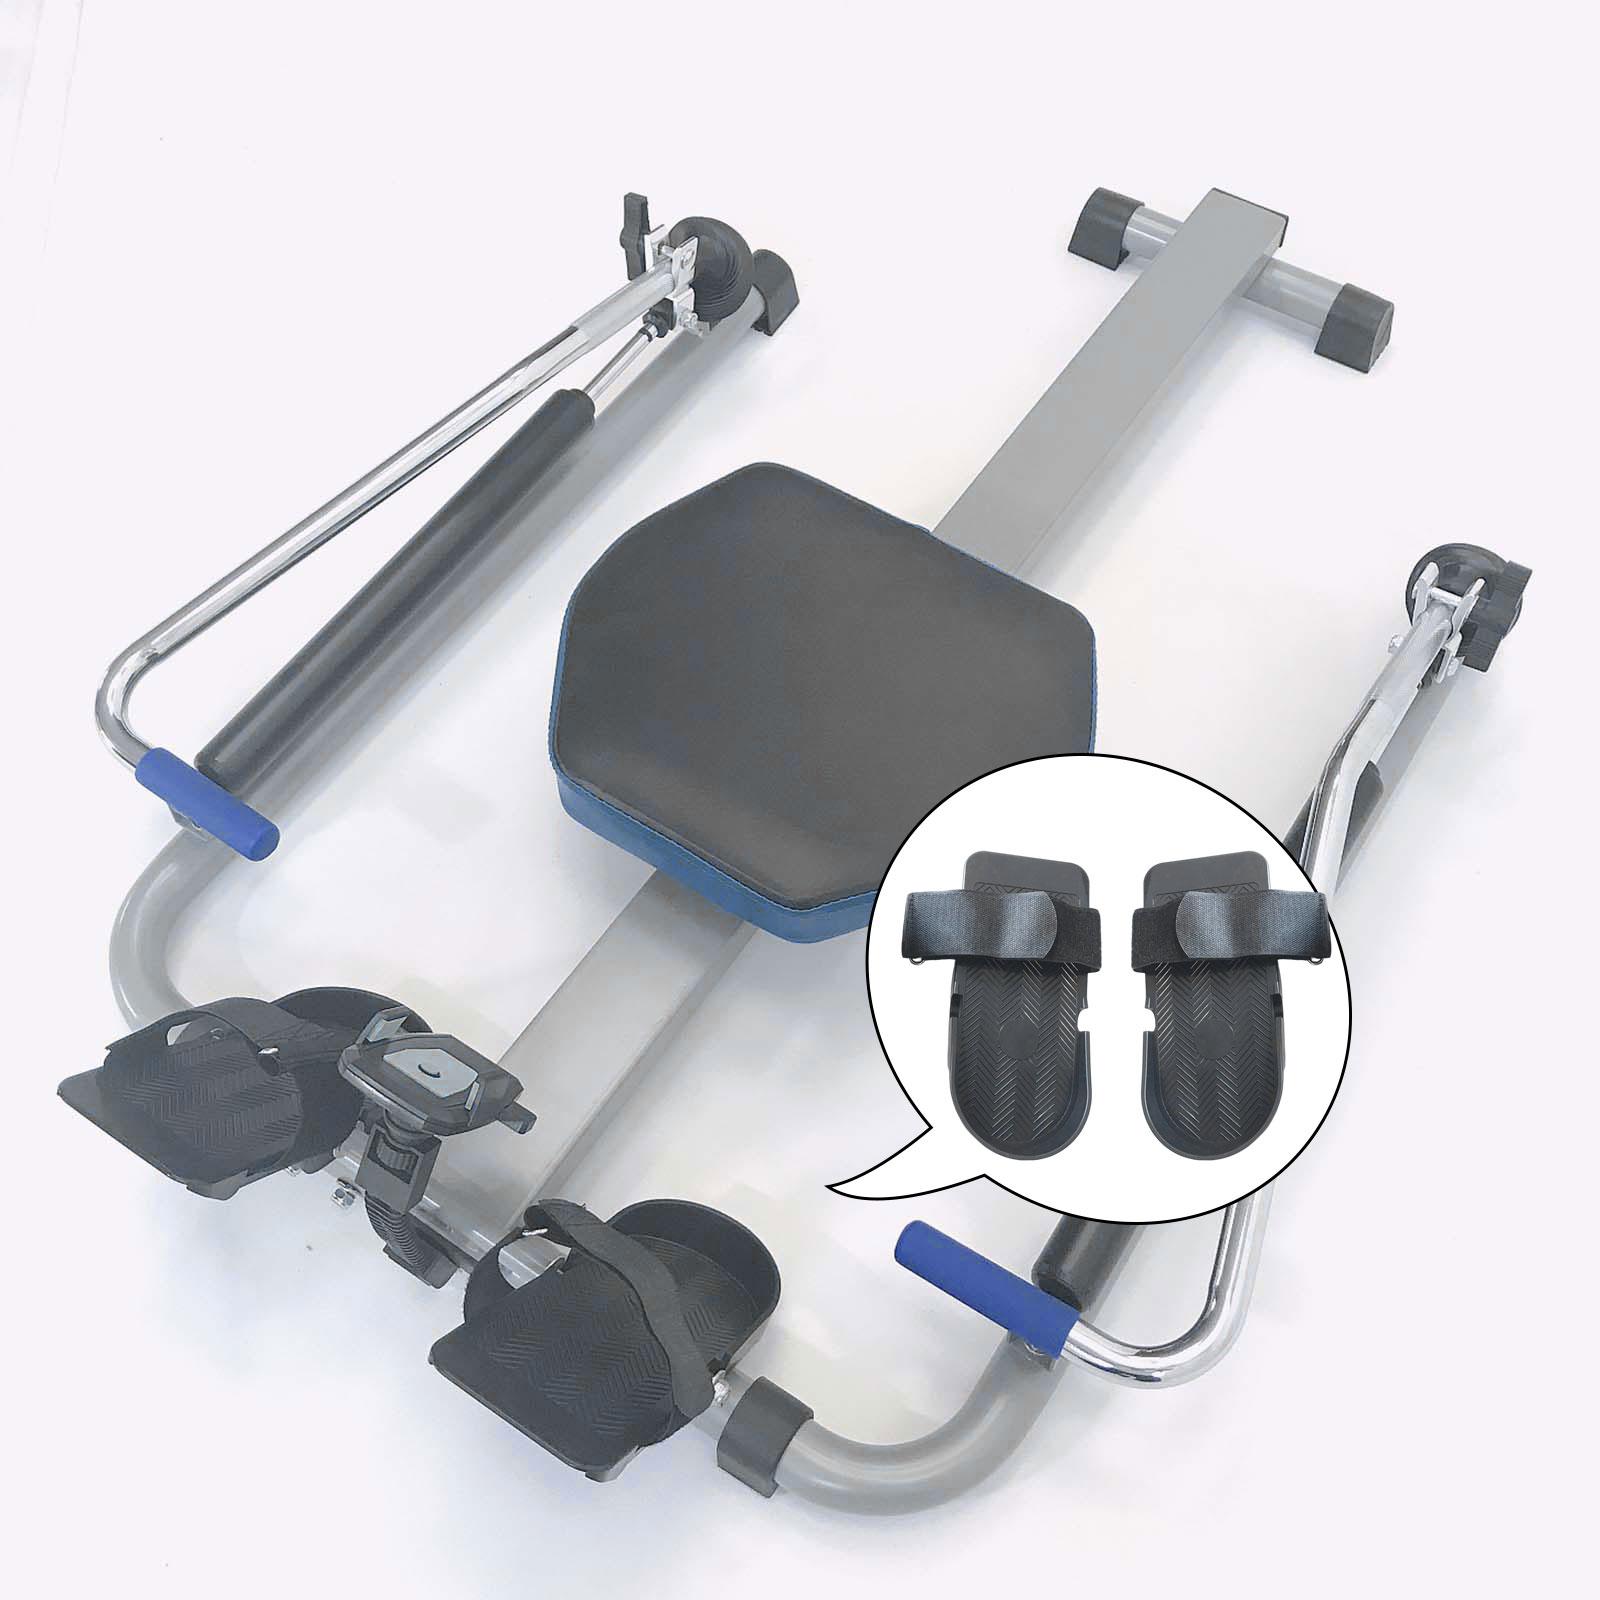 Practical Elliptical Trainer Pedals Widened Strap for Home Exercise Supplies